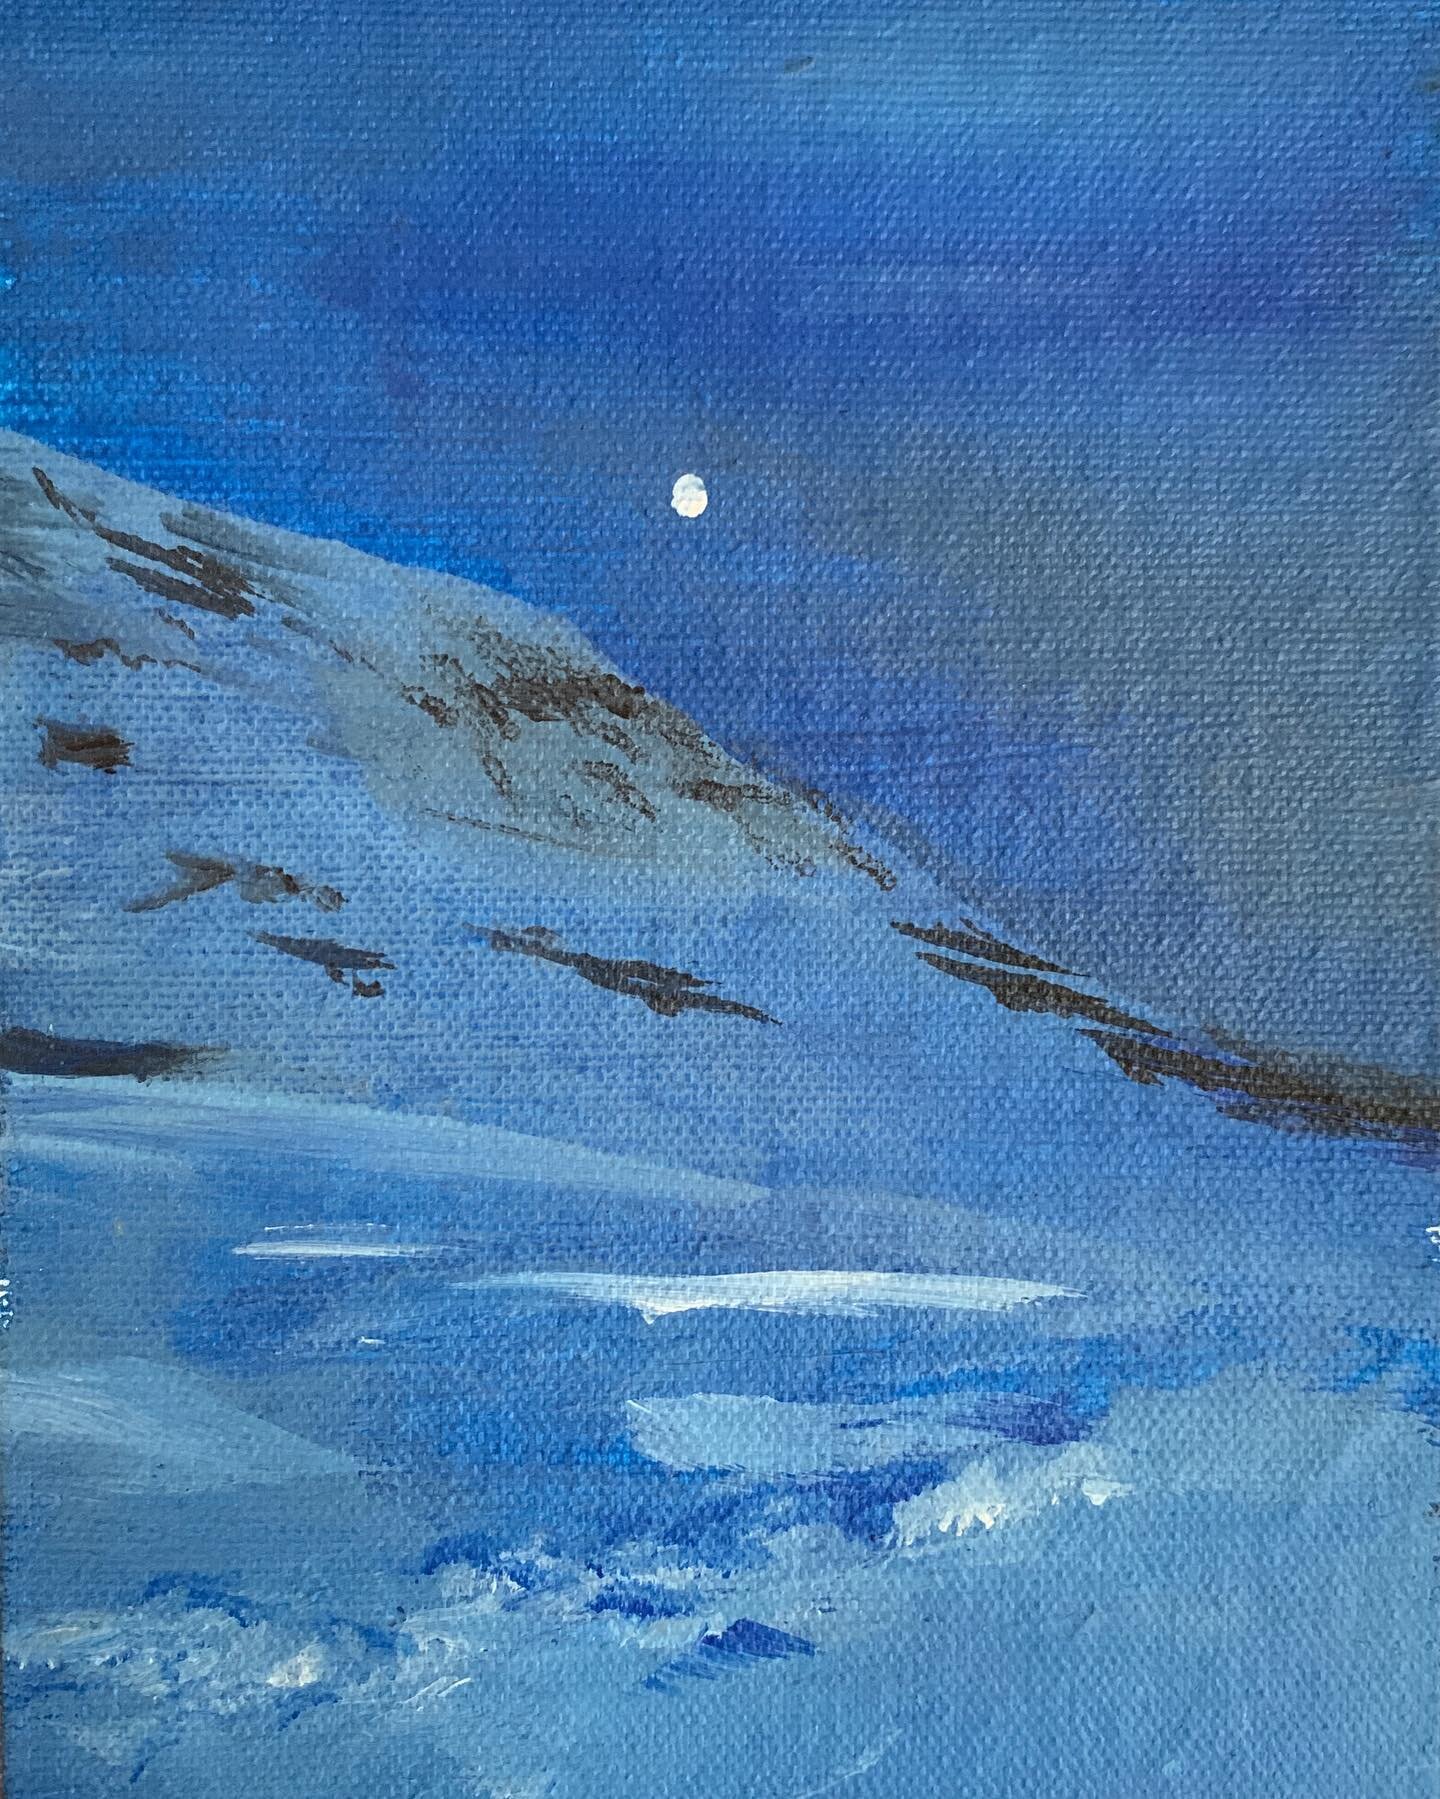 longyearbyen at midnight in spring. acrylic on canvas, 2017